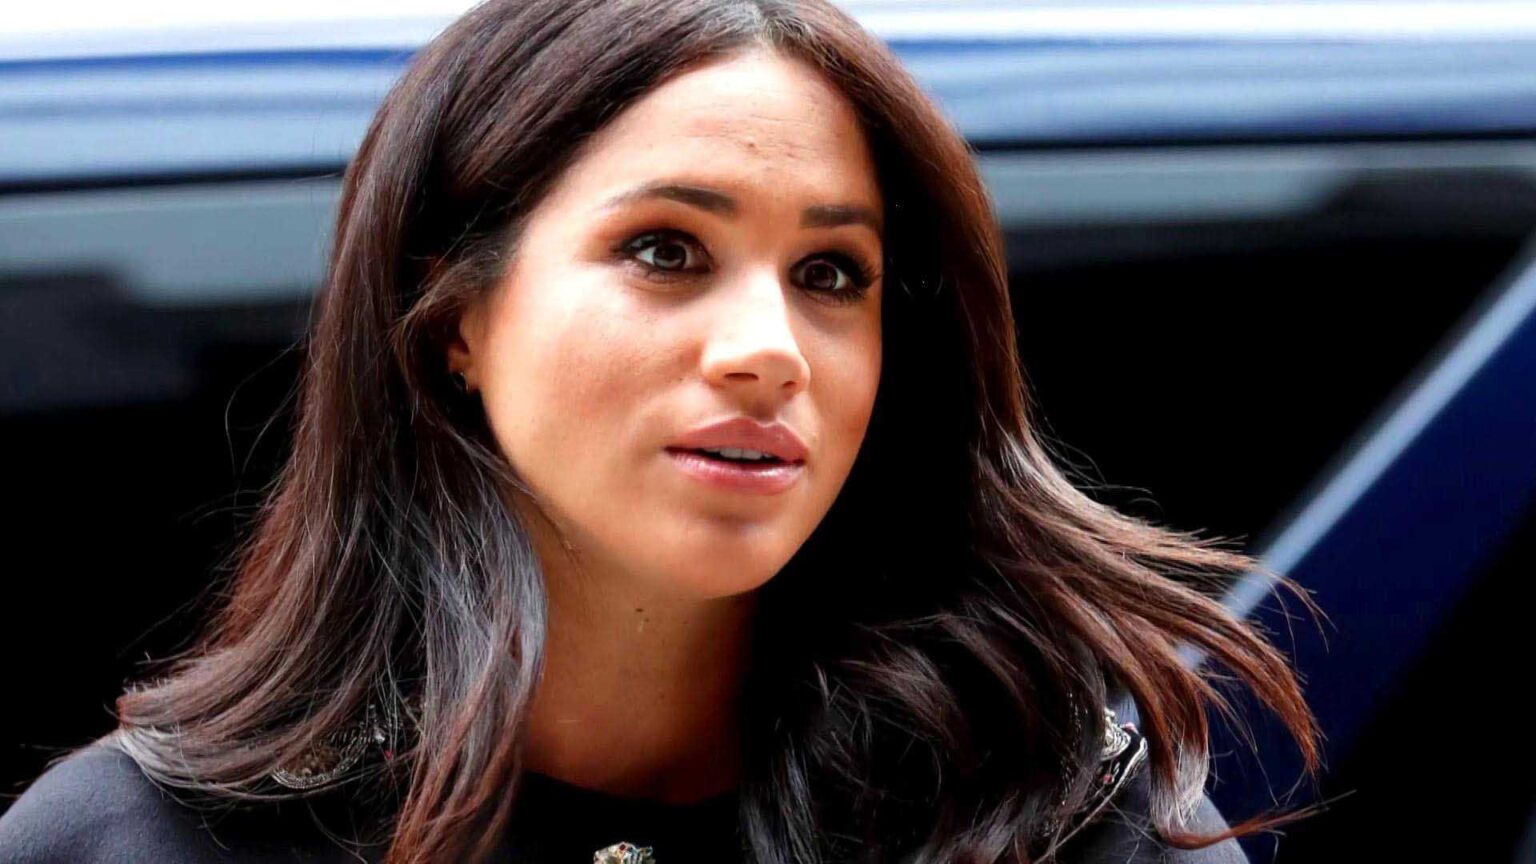 The press was brutal to young Princess Diana and people can't help but notice that Meghan Markle seems to be getting a similar treatment.